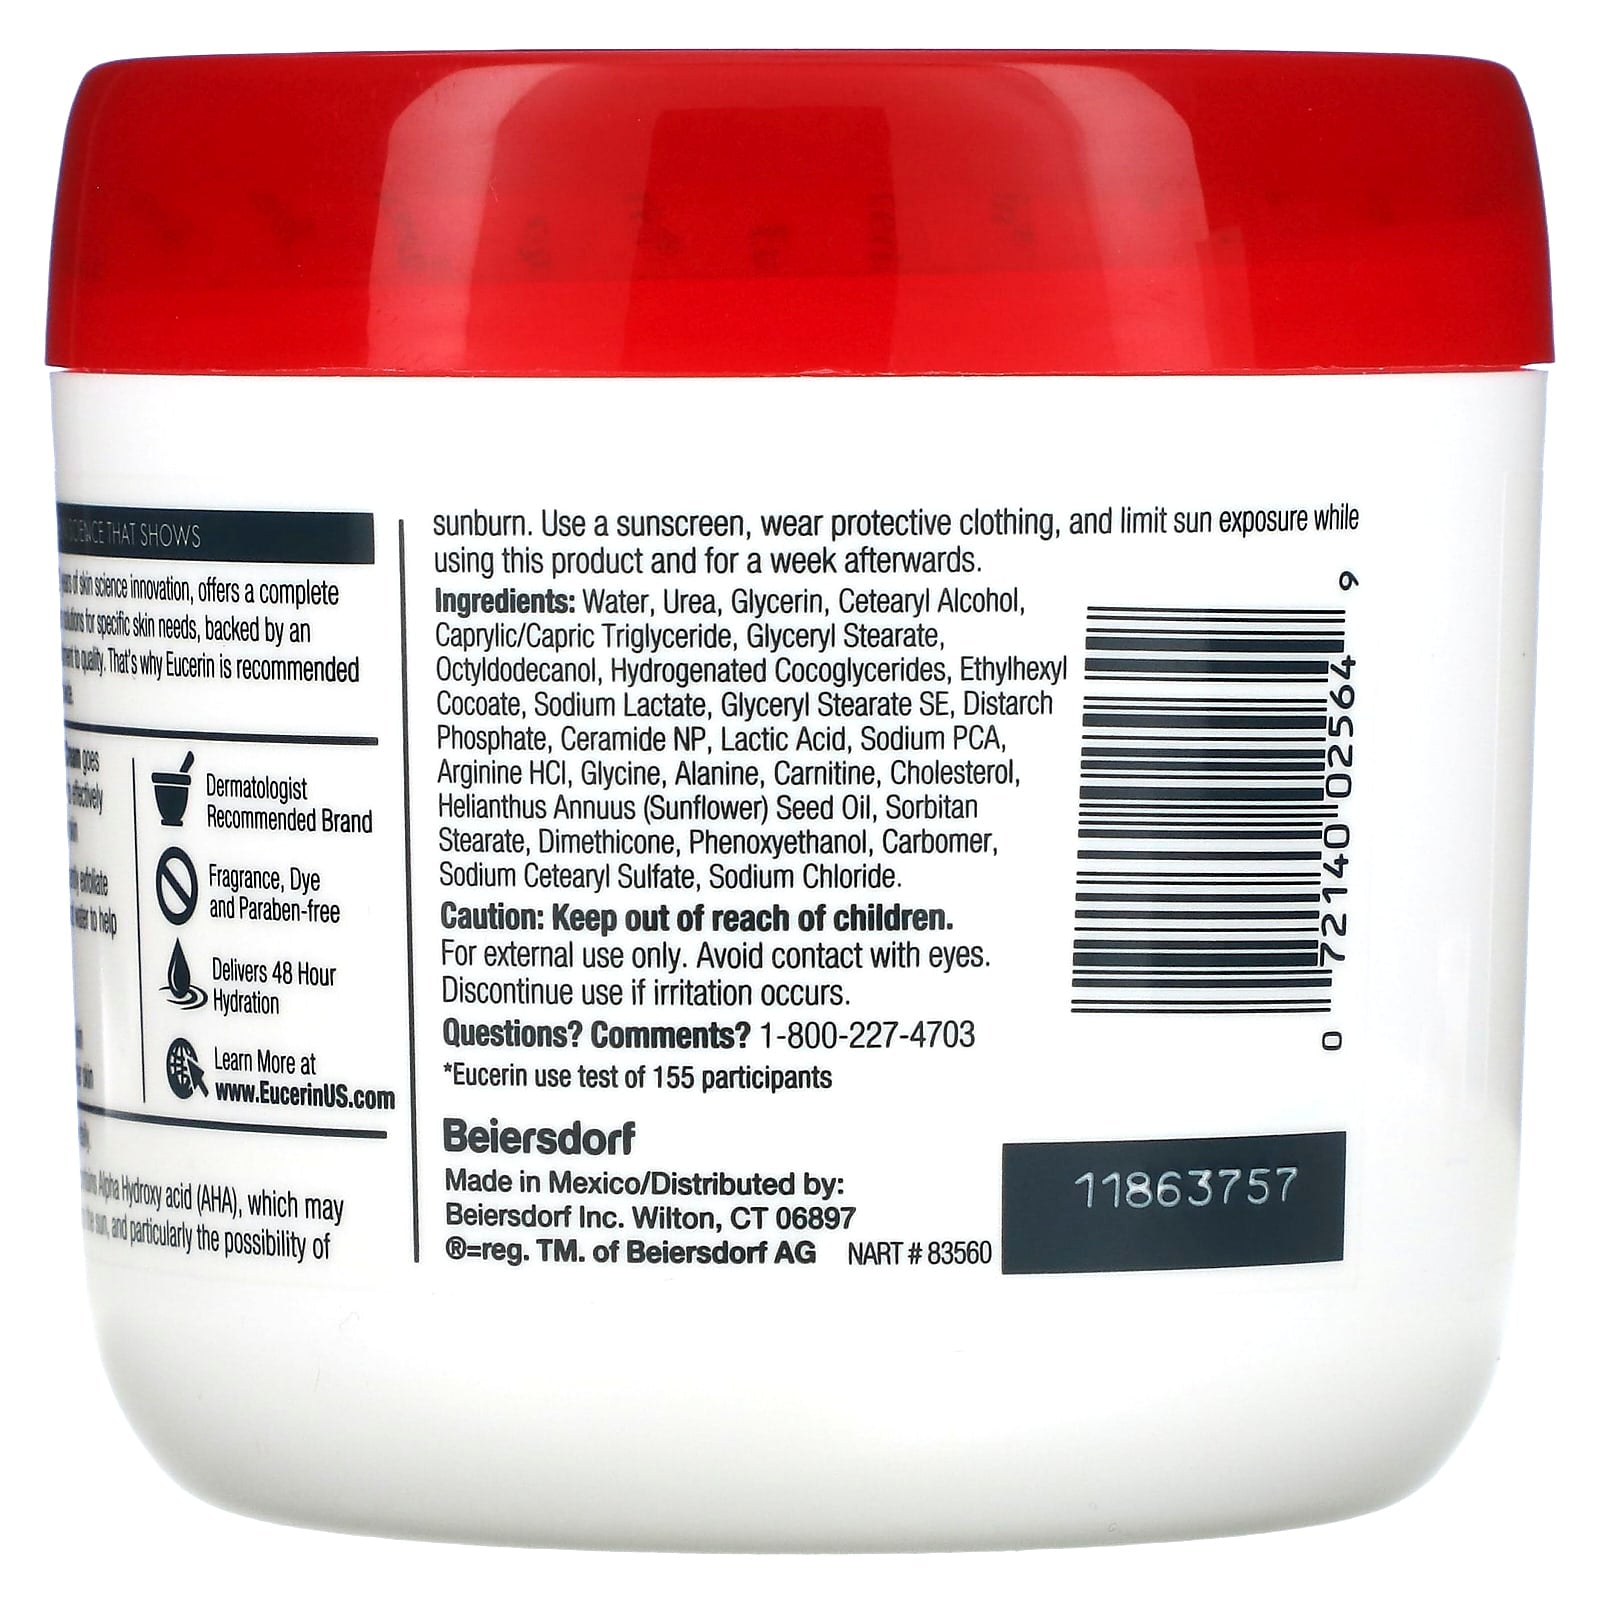 Roughness Relief Cream, Fragrance Free, 16 oz (454 g)